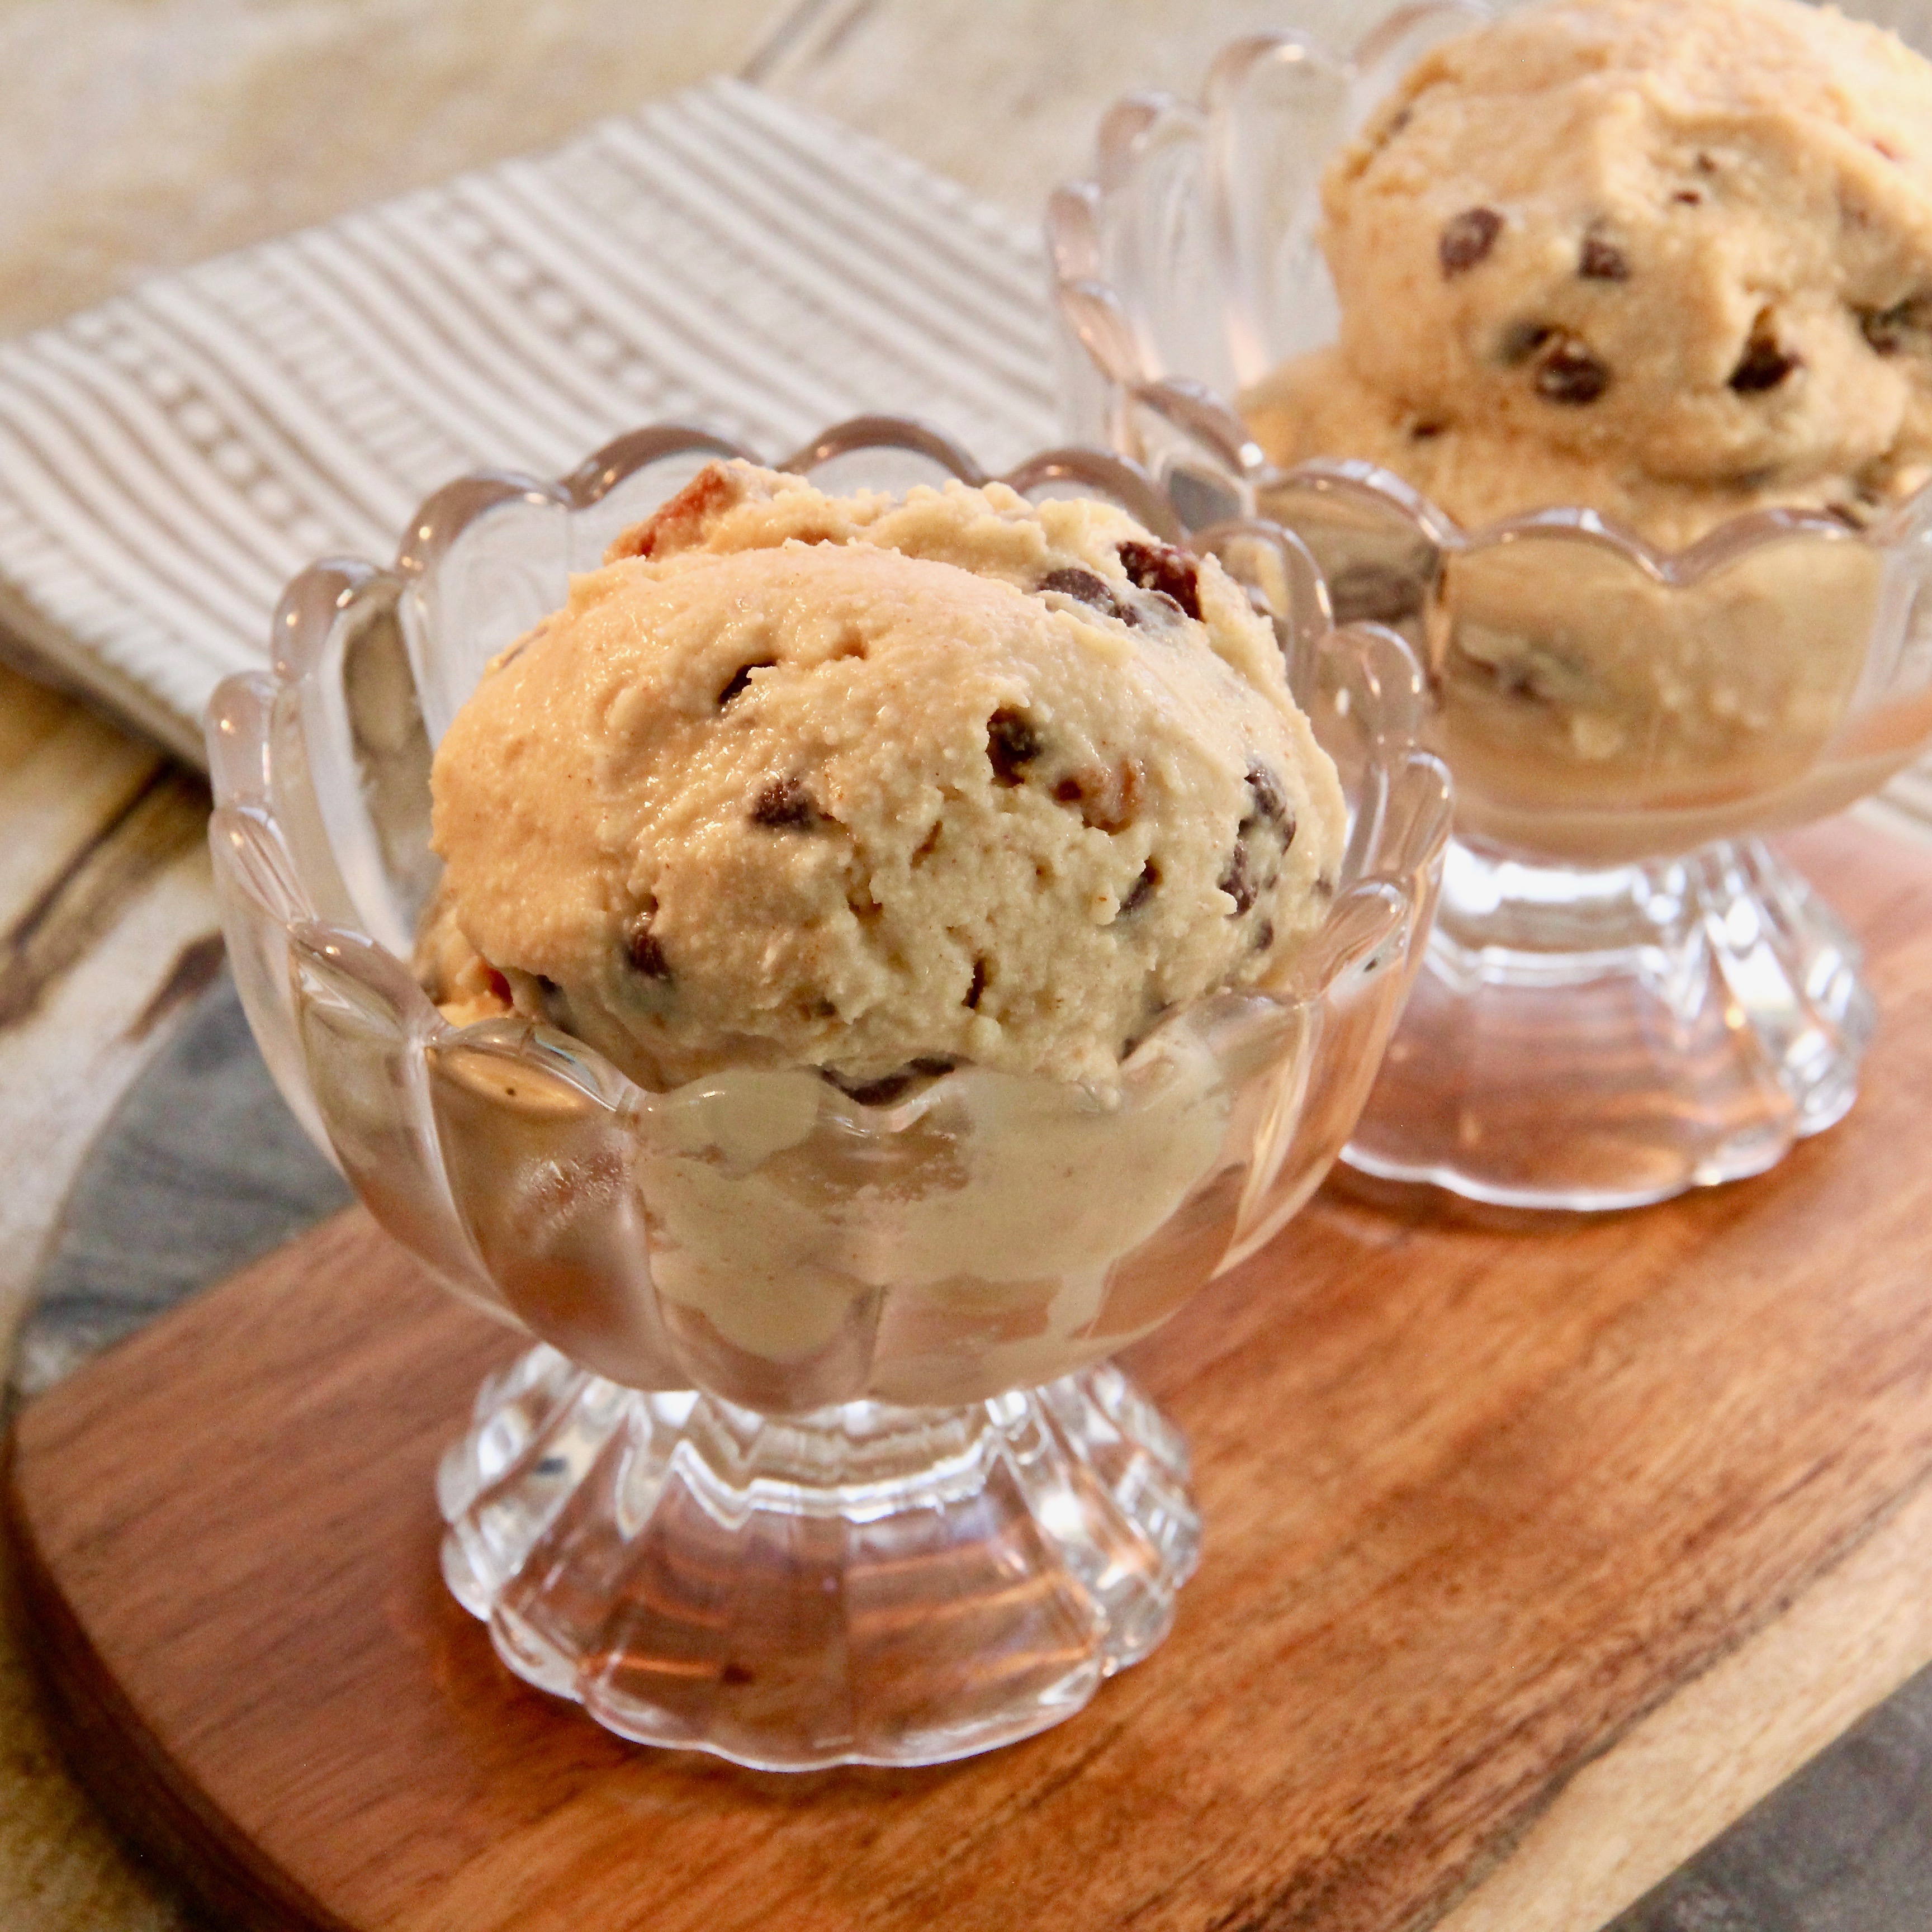 Peanut Butter, Chocolate Chip, and Bacon Ice Cream